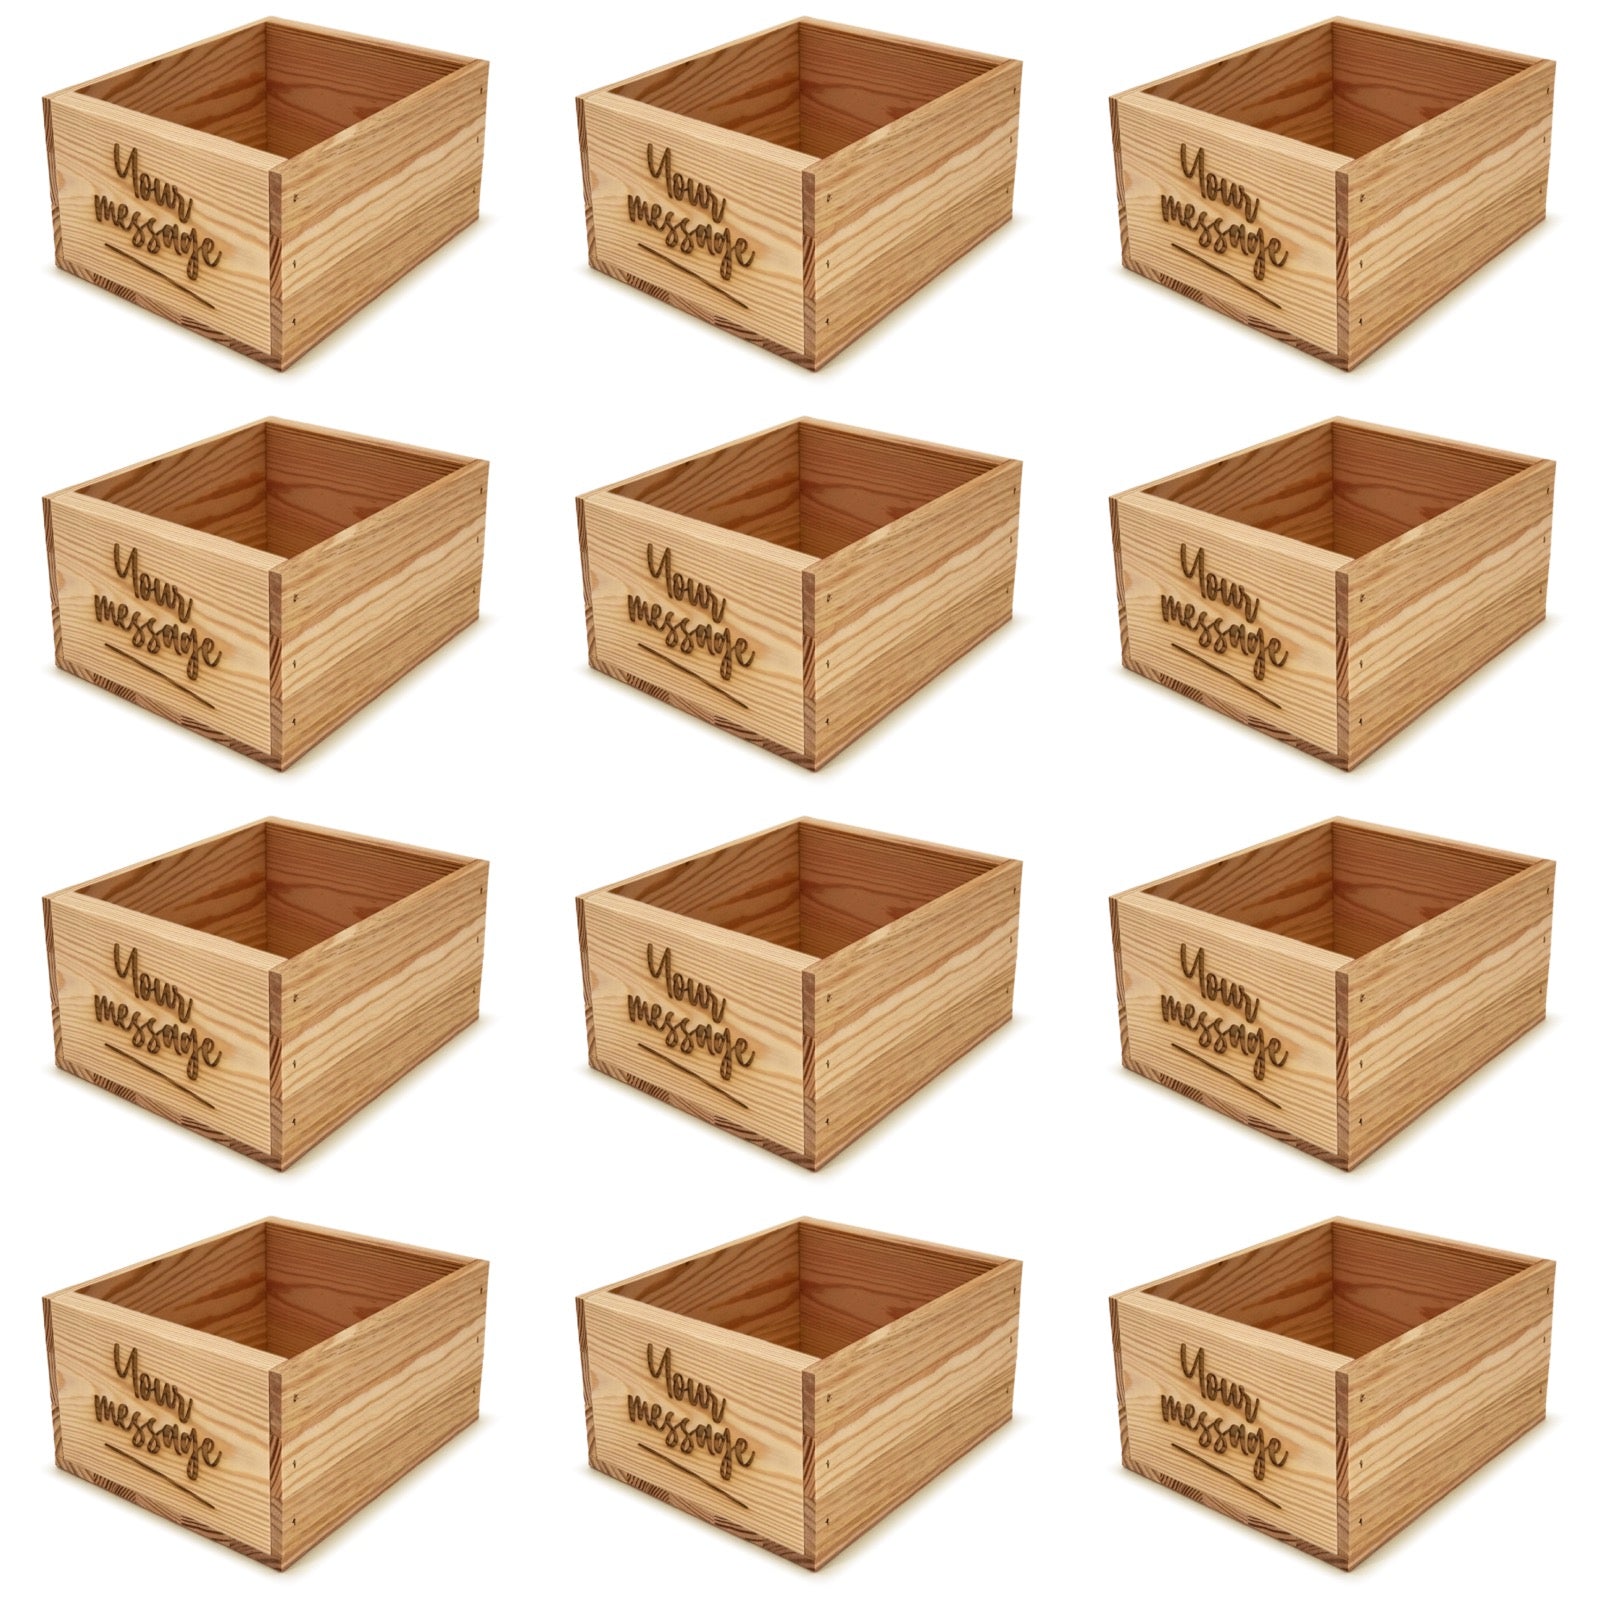 12 Small wooden crates with custom message 9x8x5.25